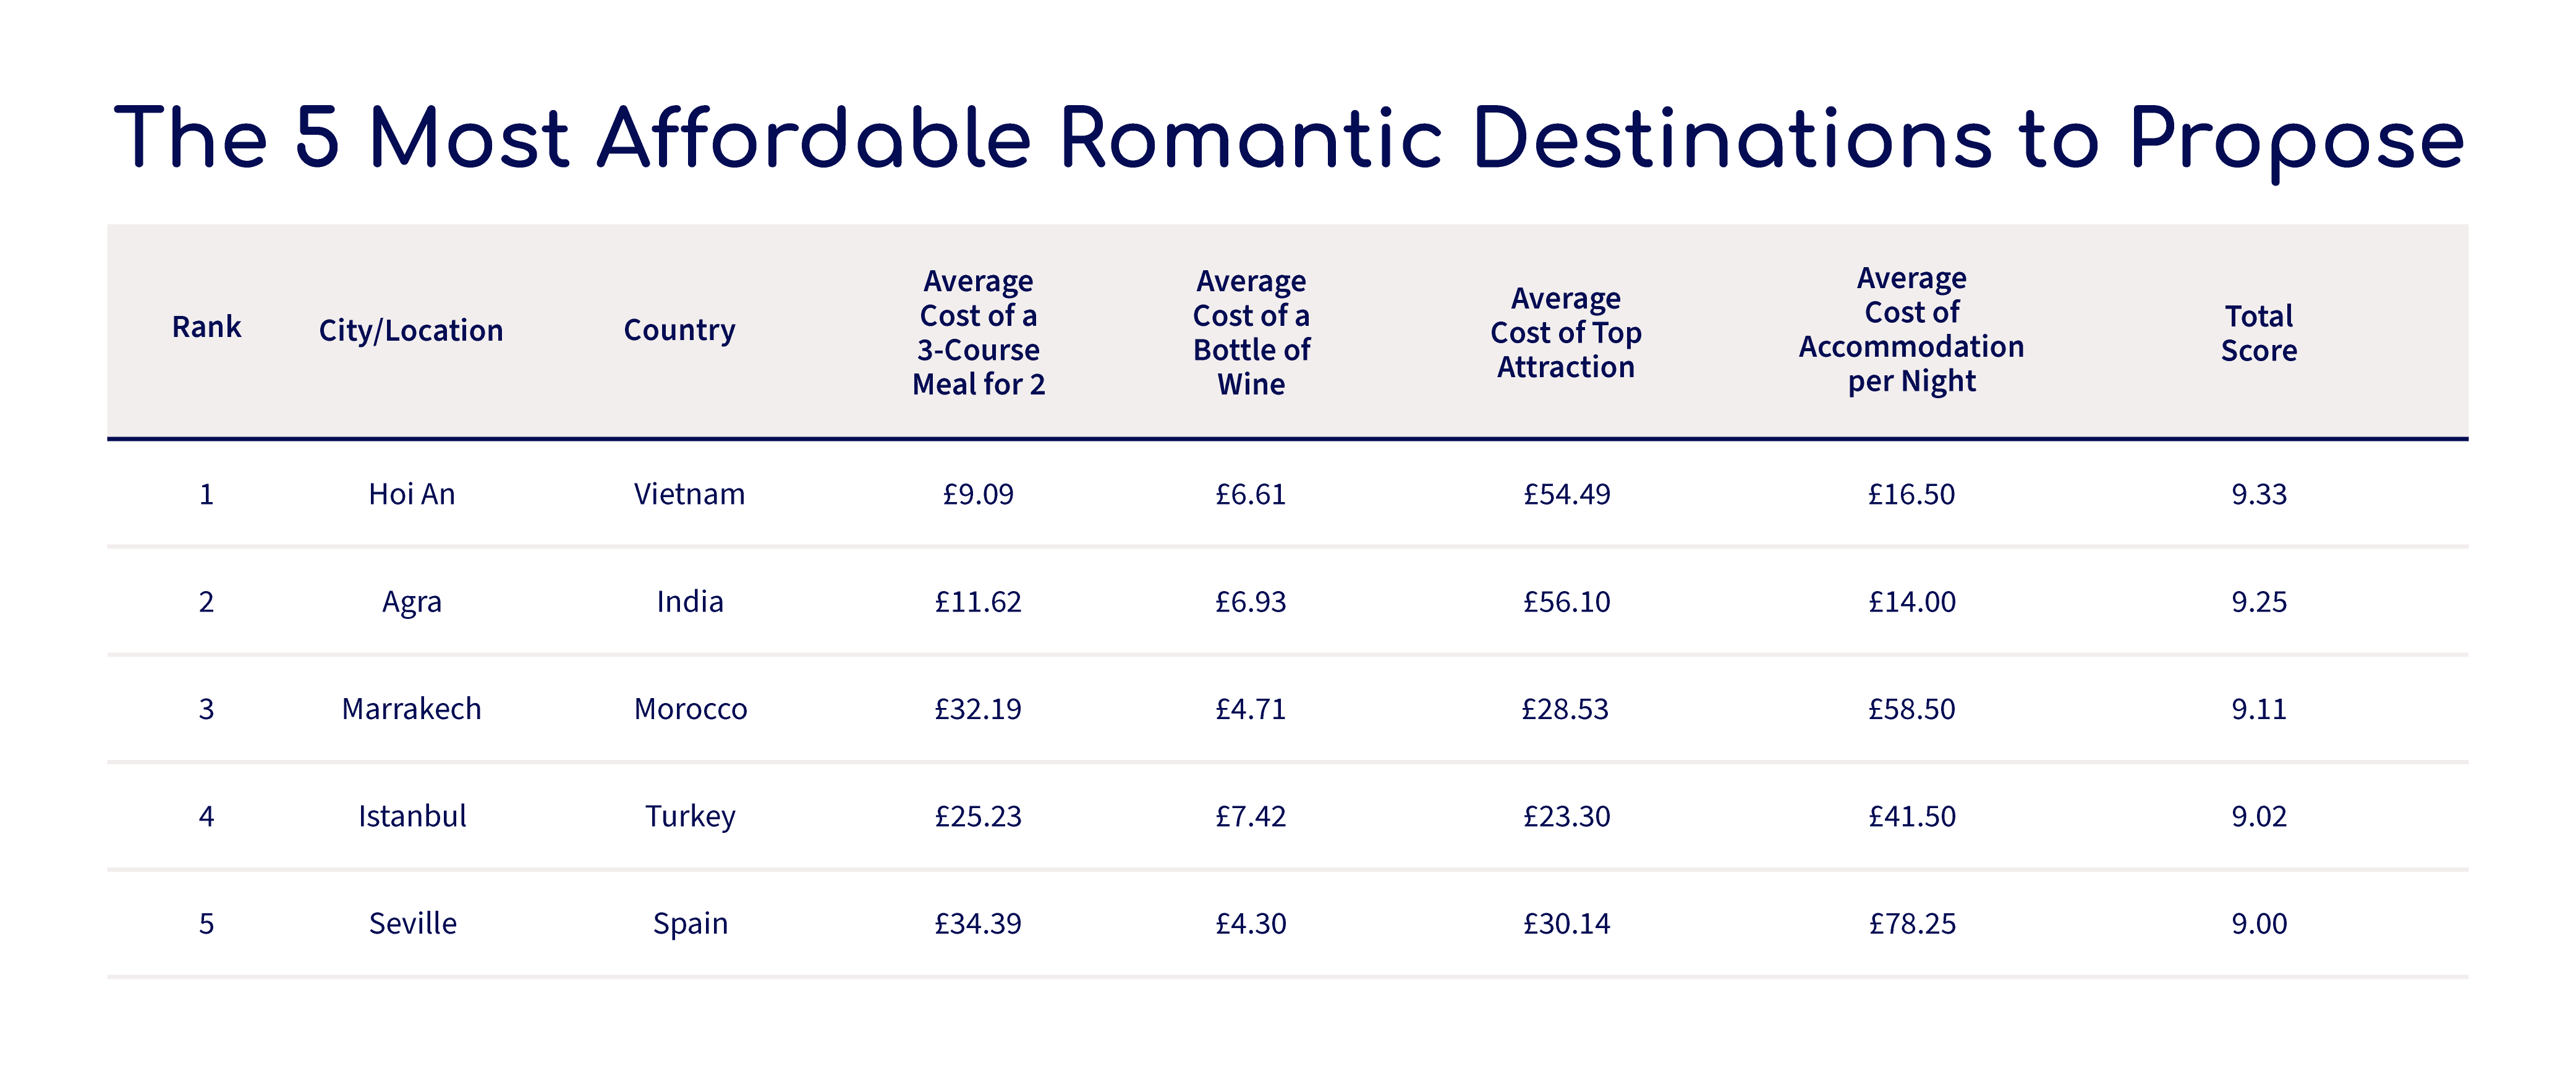 The top 5 most affordable romantic destinations to propose